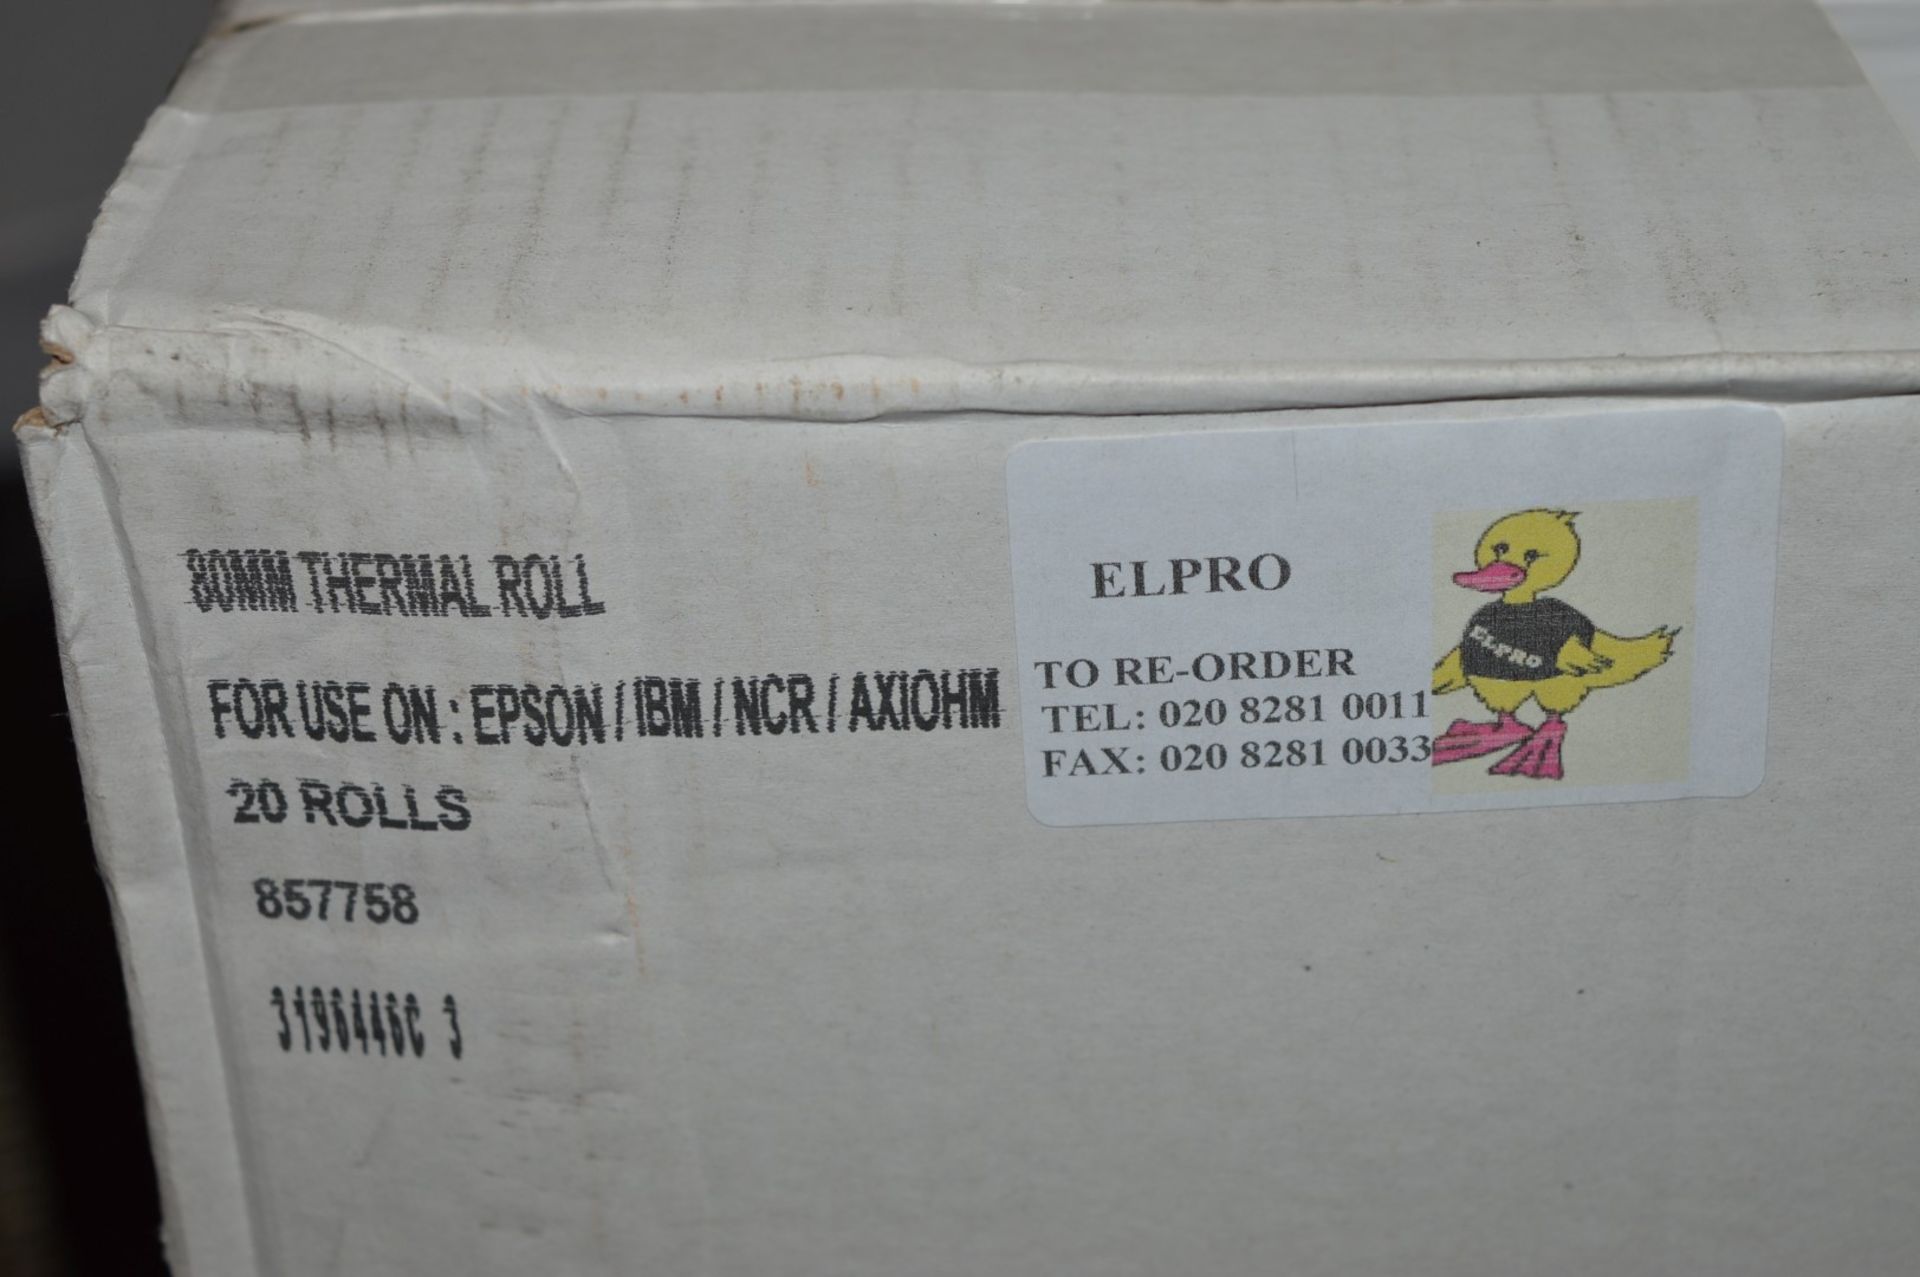 60 x 80mm Thermal Till Rolls - Elpro Branded - Suitable For Epson, IBM, NCR and Axiohm Printers - - Image 2 of 2